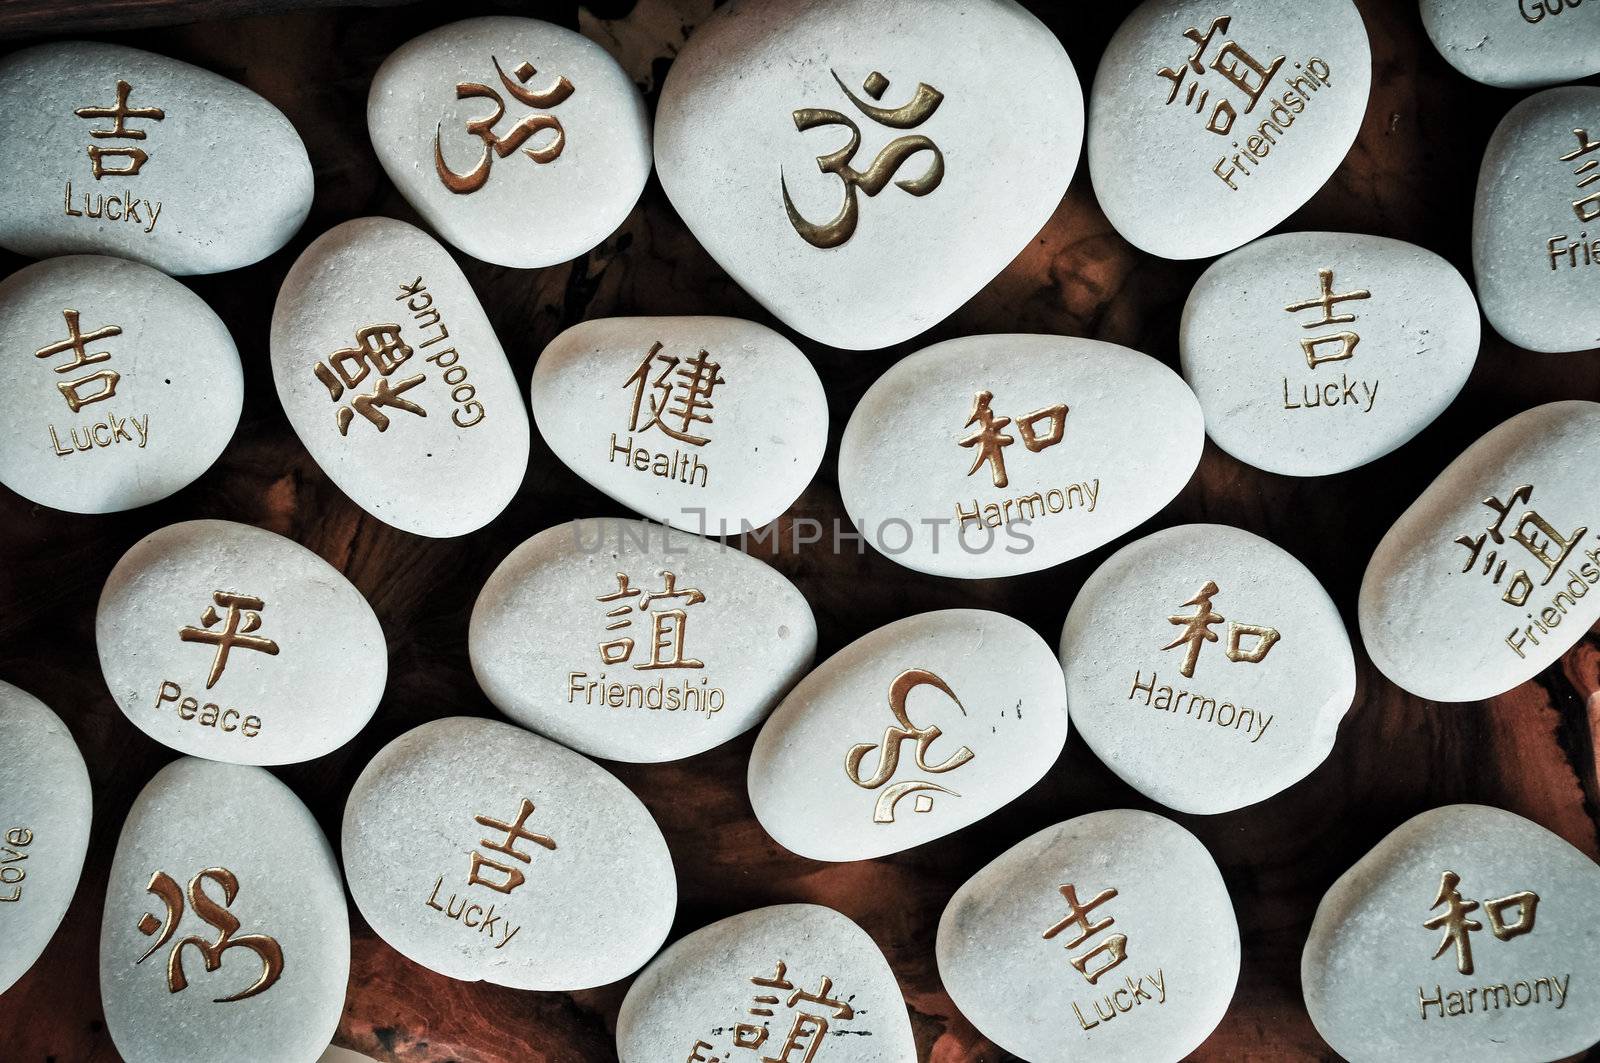 Fortune stones with symbols and writings by martinm303